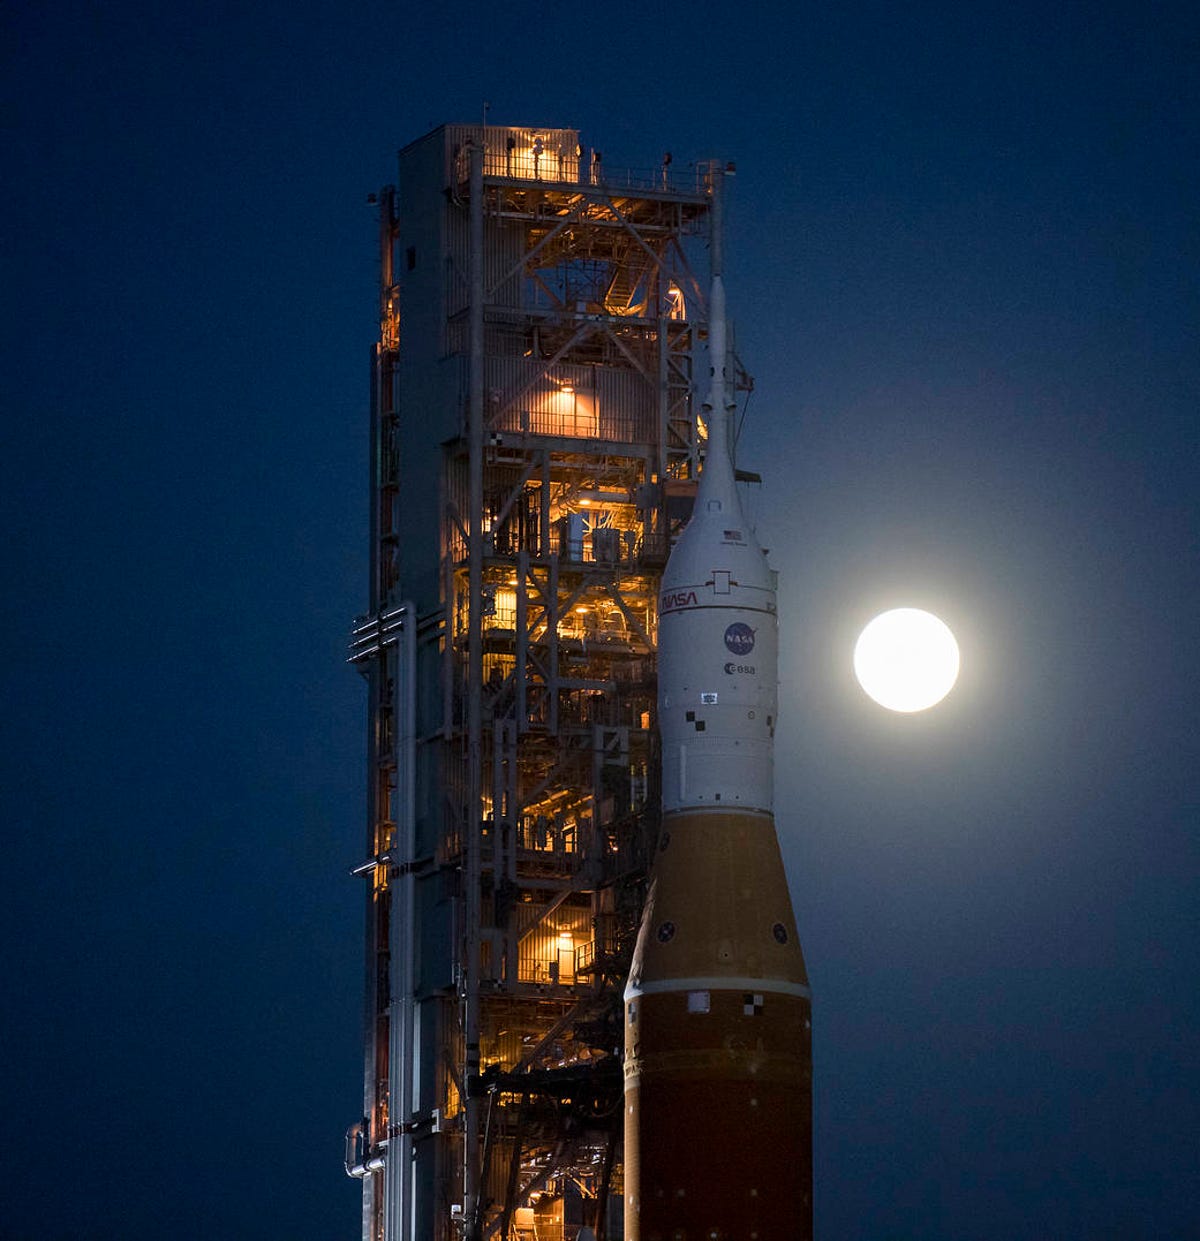 It's dusk, and the top of NASA's orange SLS rocket attached to the white Orion spacecraft is seen with a brilliant, glowing moon in the background.